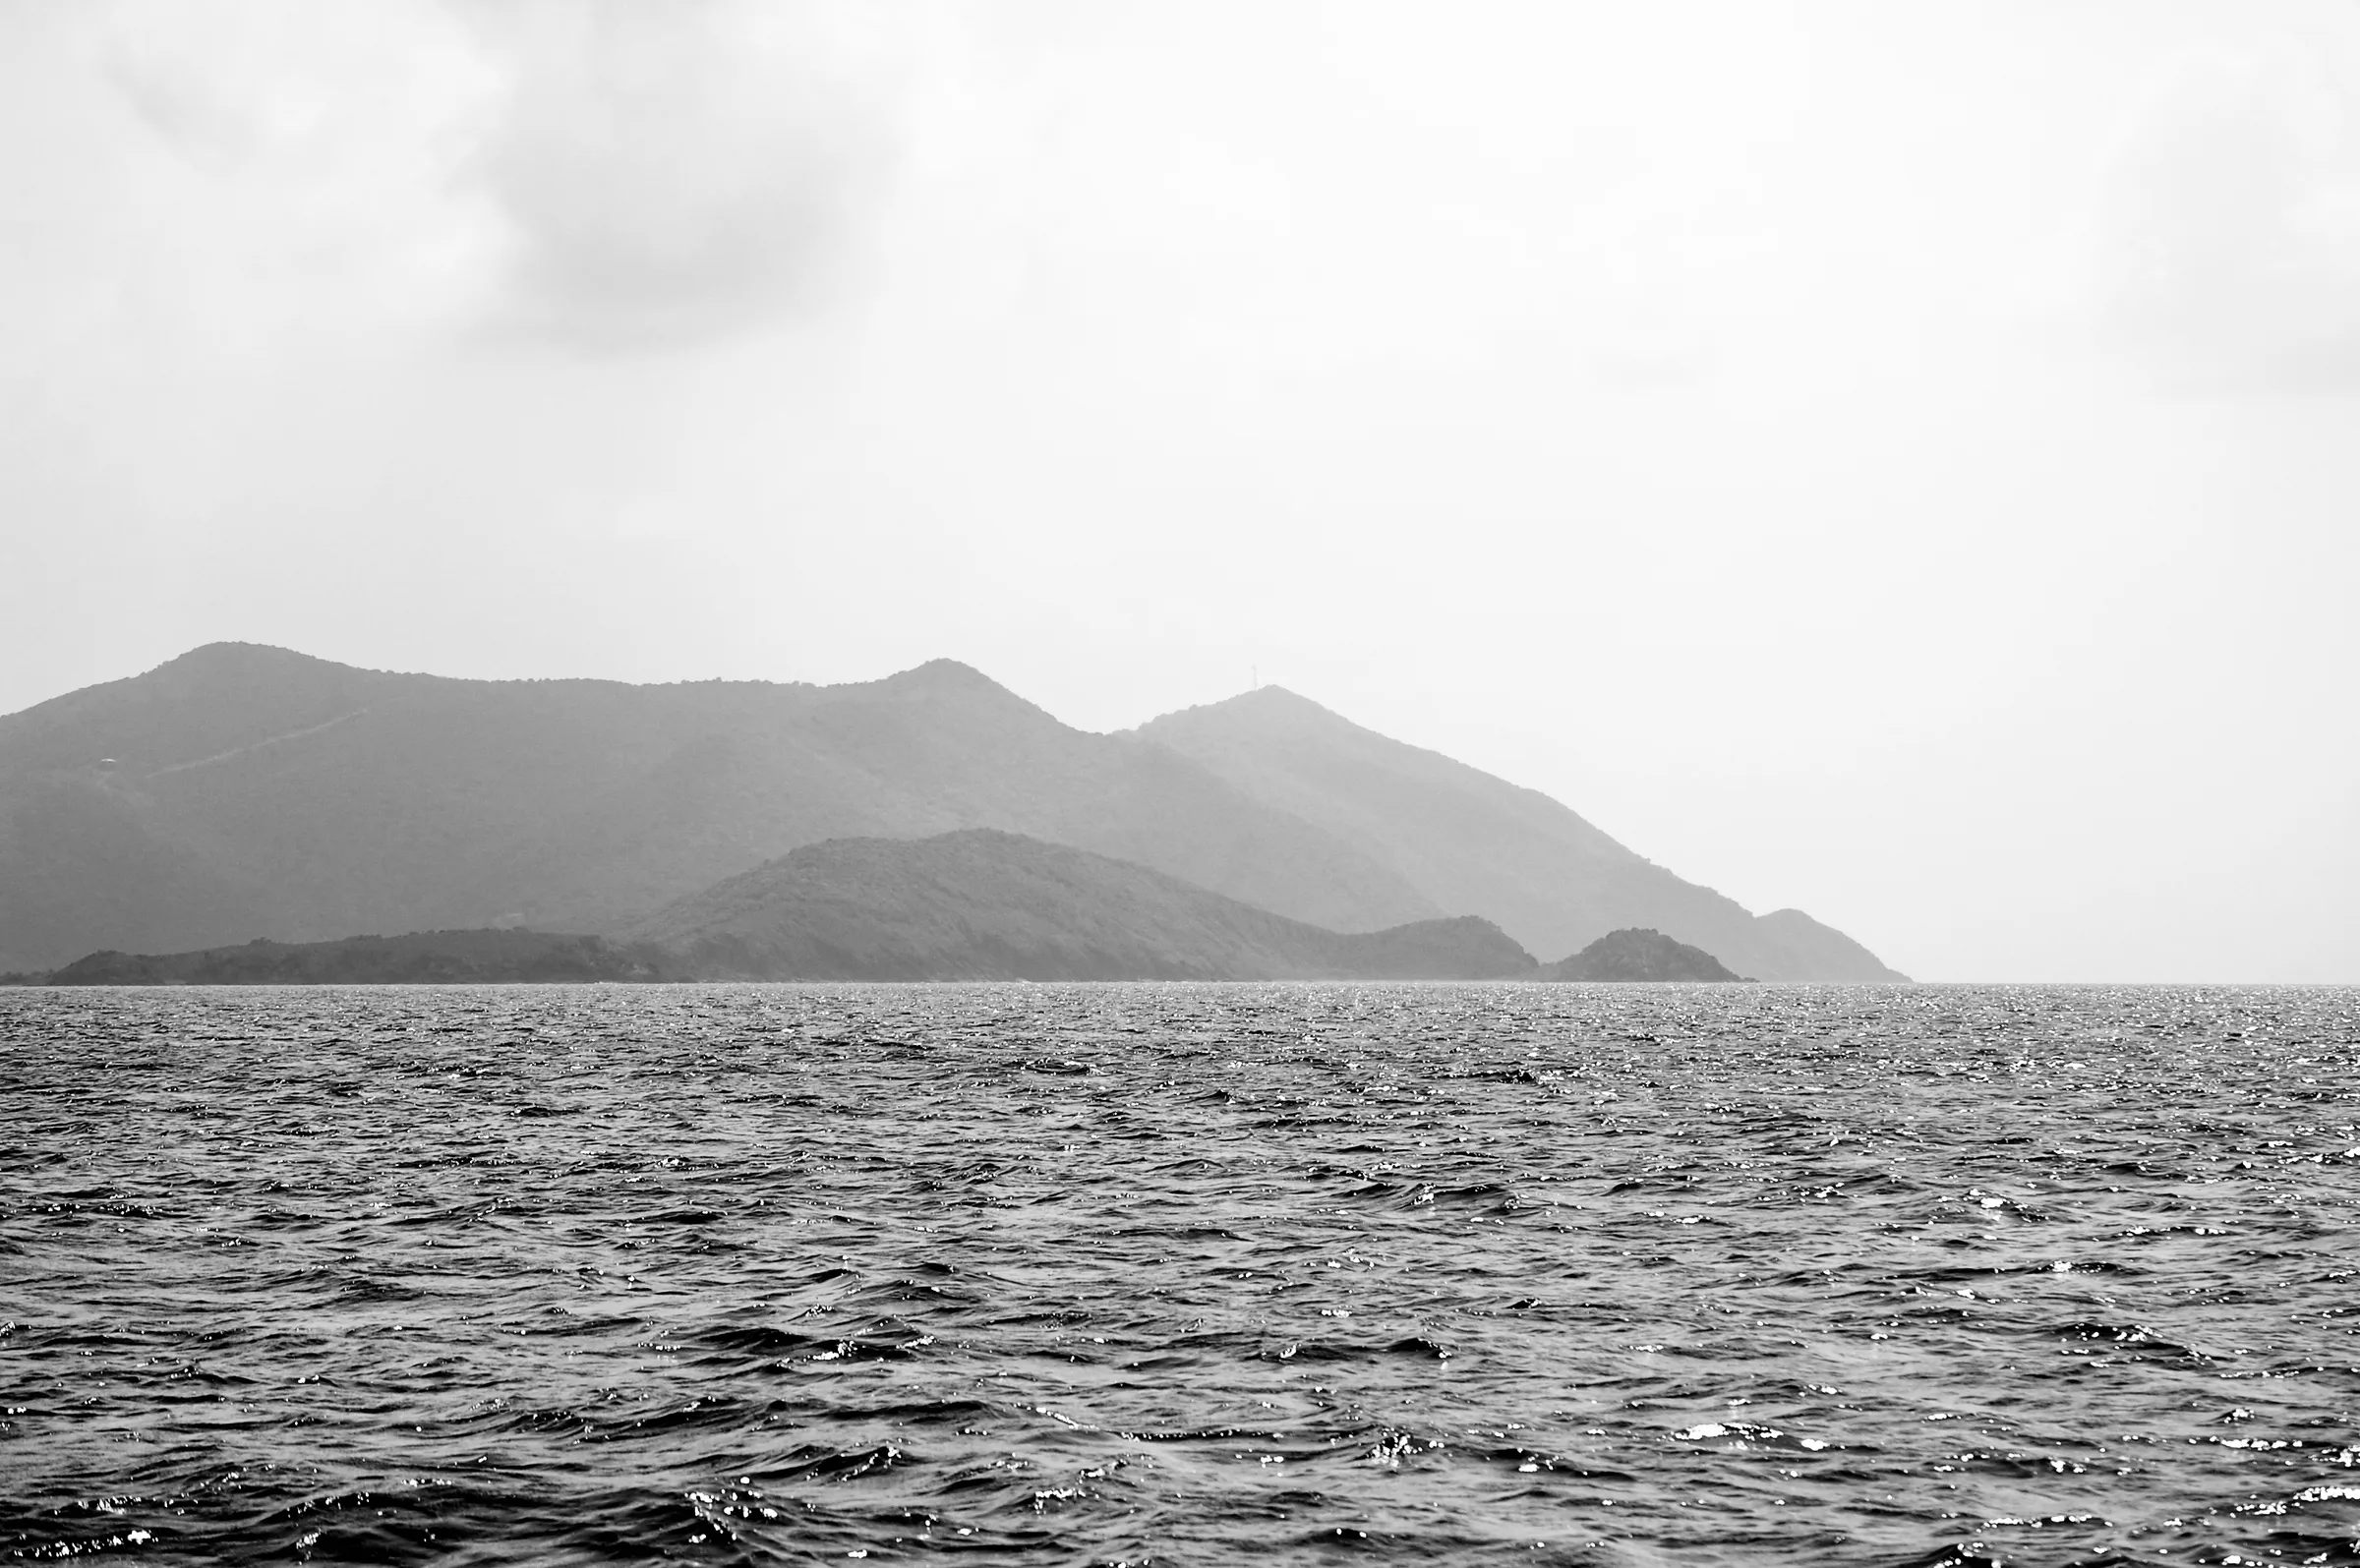 Hills in the distance, over the water, taken from a boat in the Atlantic Ocean, near Tortola.